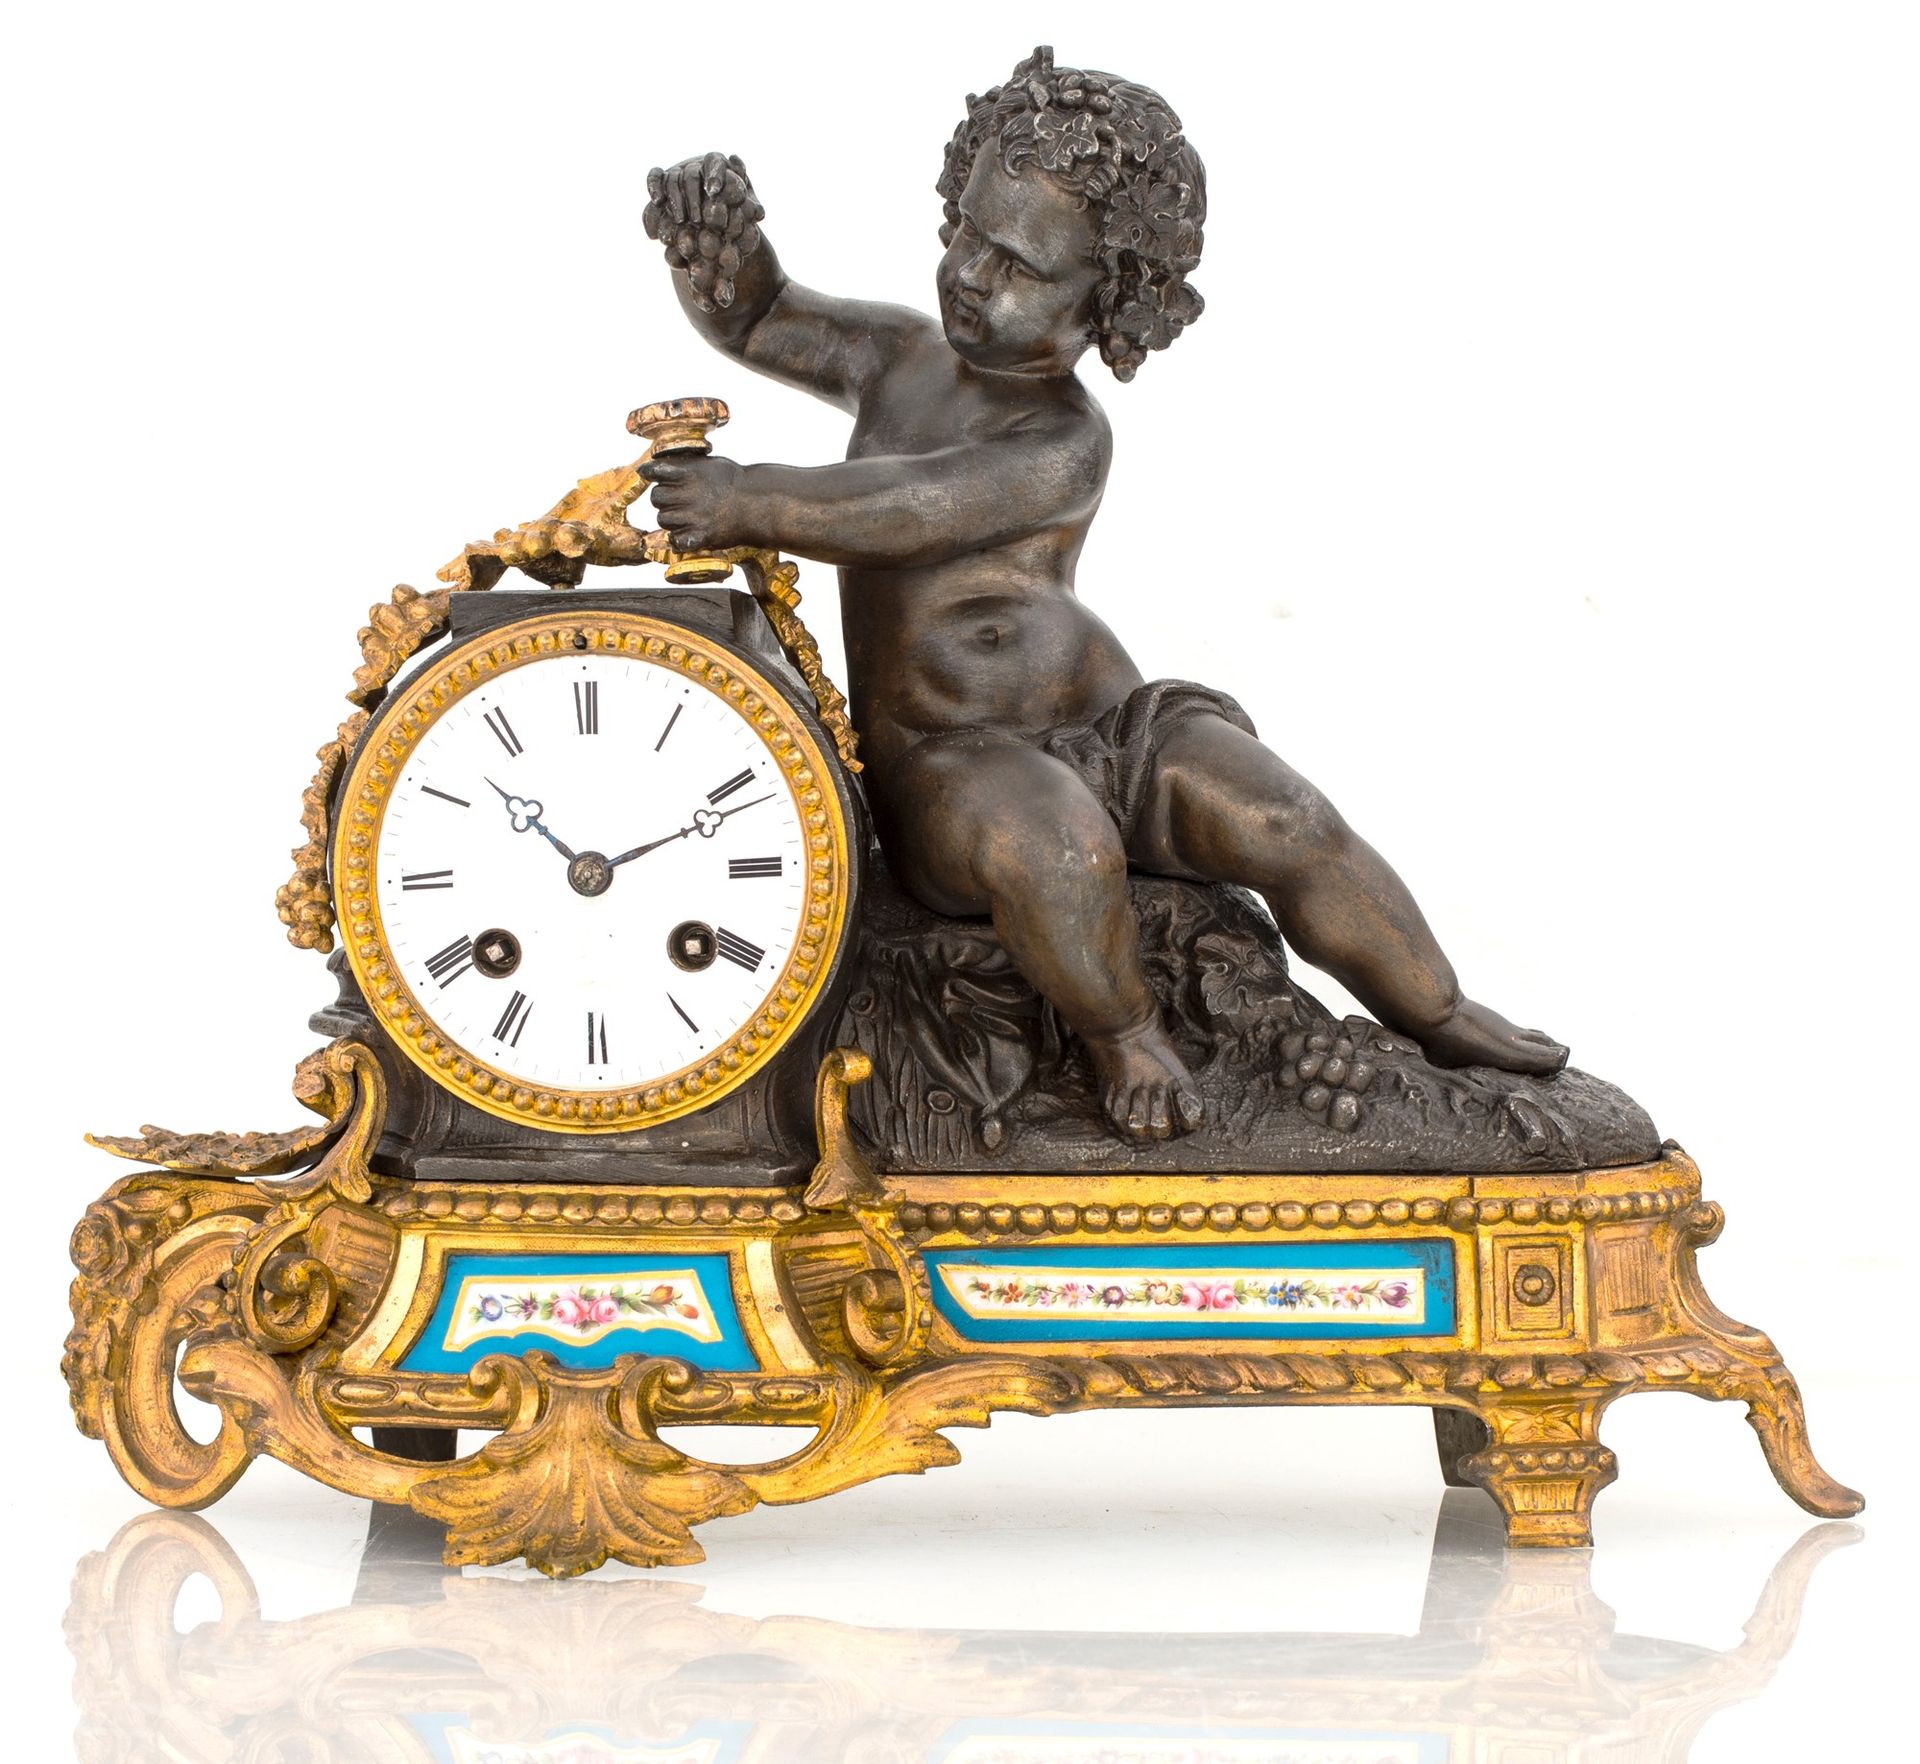 Burnished and gilded bronze clock with Sèvres porcelain plates, 19th century car&hellip;